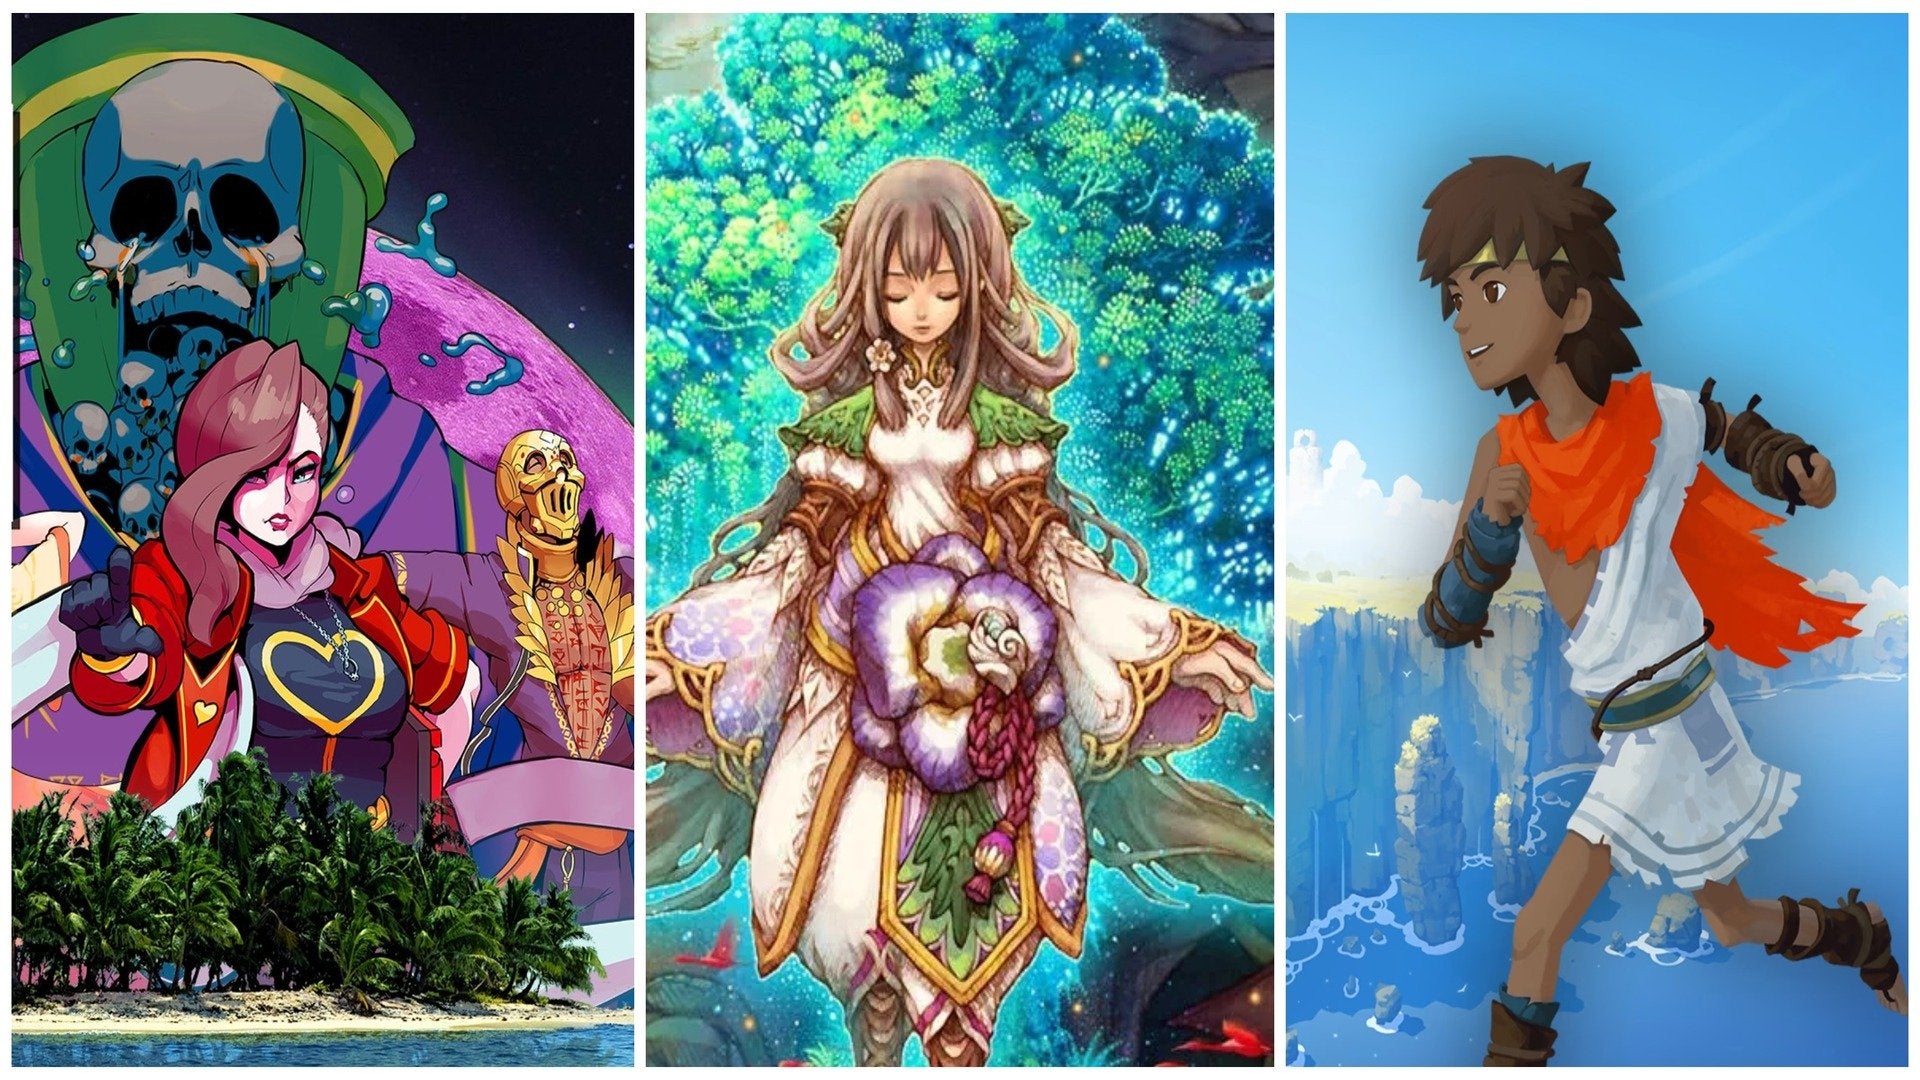 The cover art from the games Paradise Killer, Dawn of Mana, and RiME.